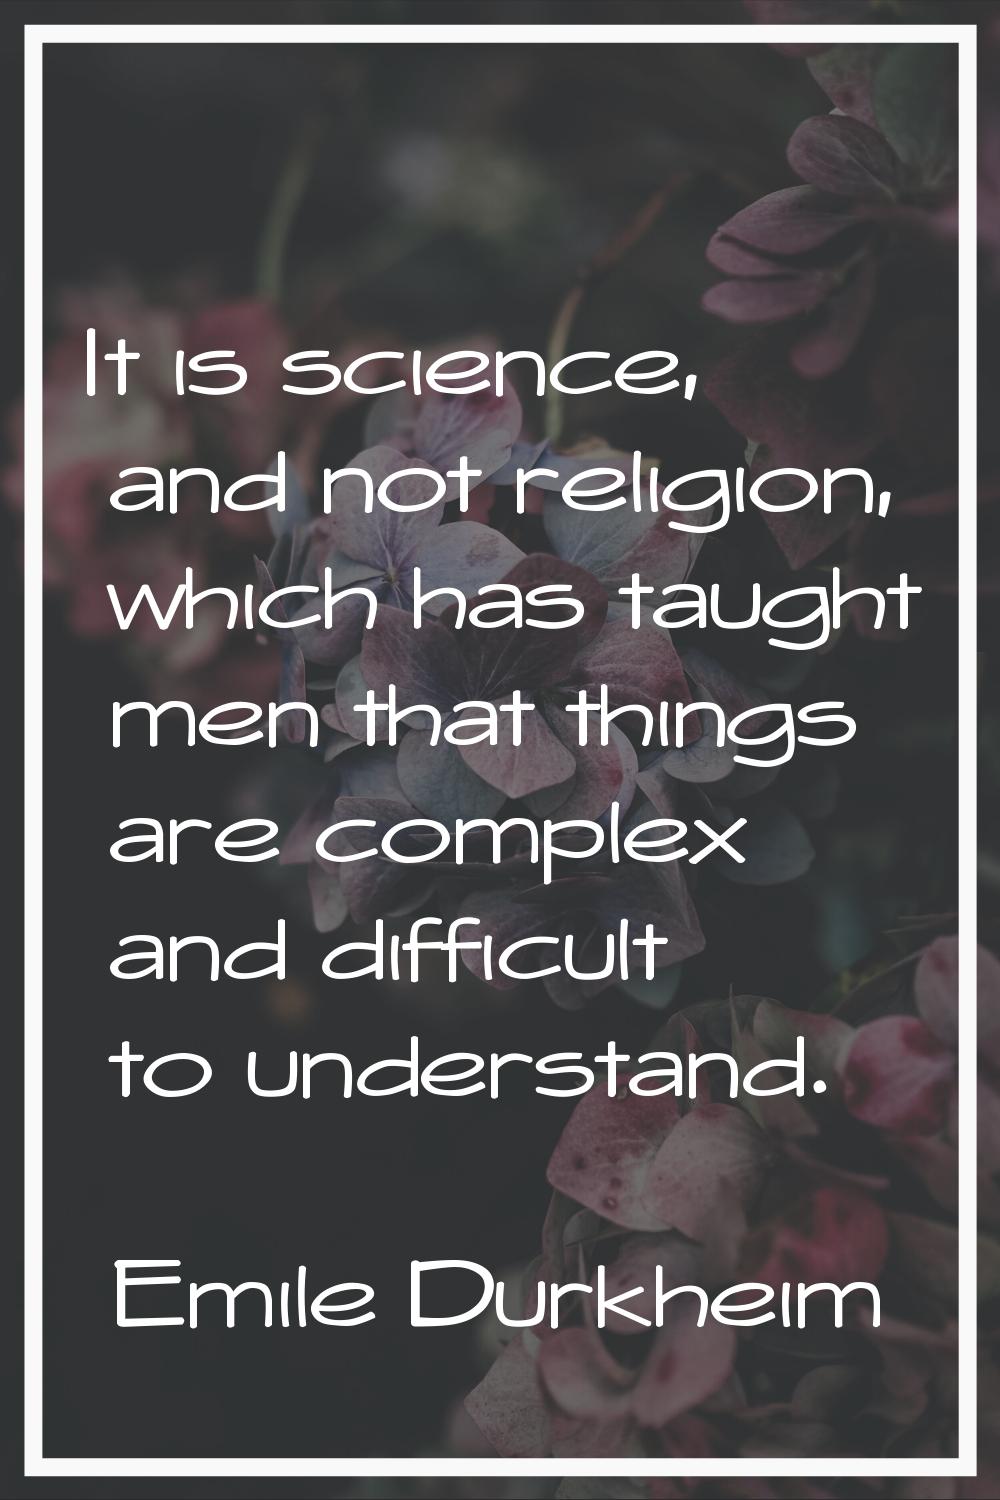 It is science, and not religion, which has taught men that things are complex and difficult to unde